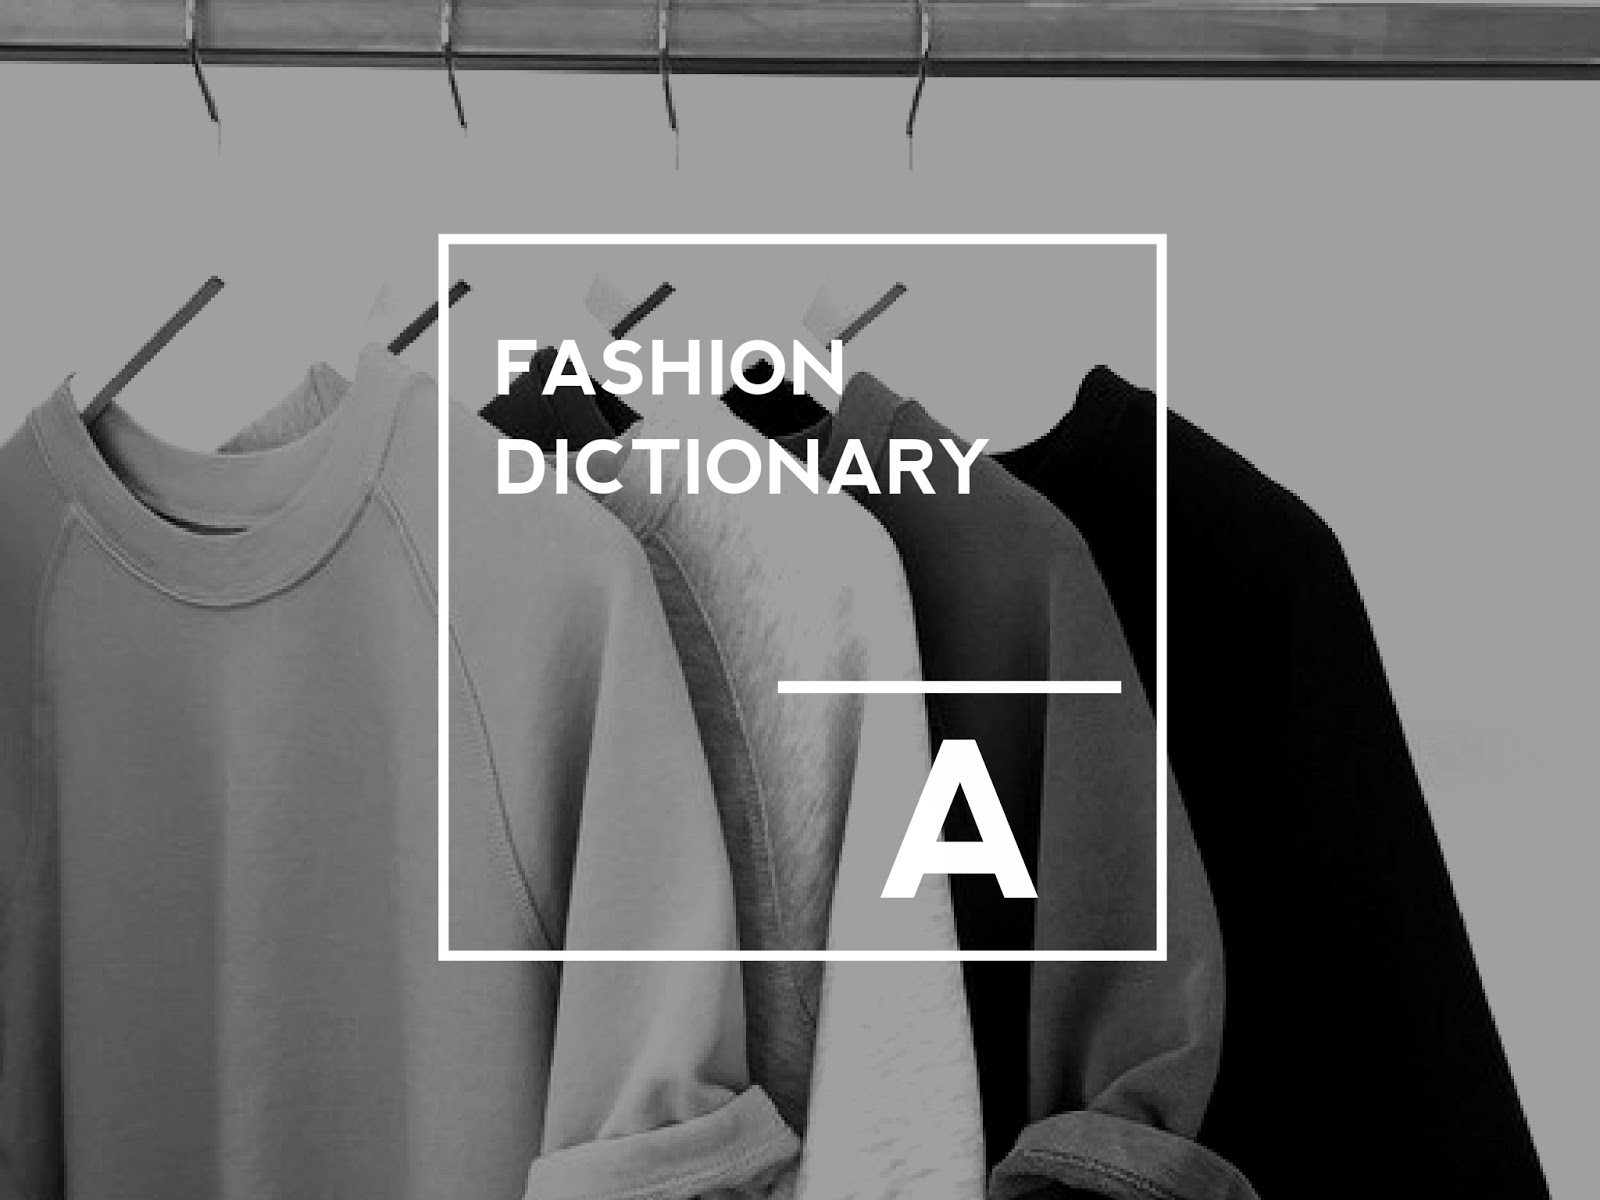 Fashion Dictionary 'A' - Independent Girl